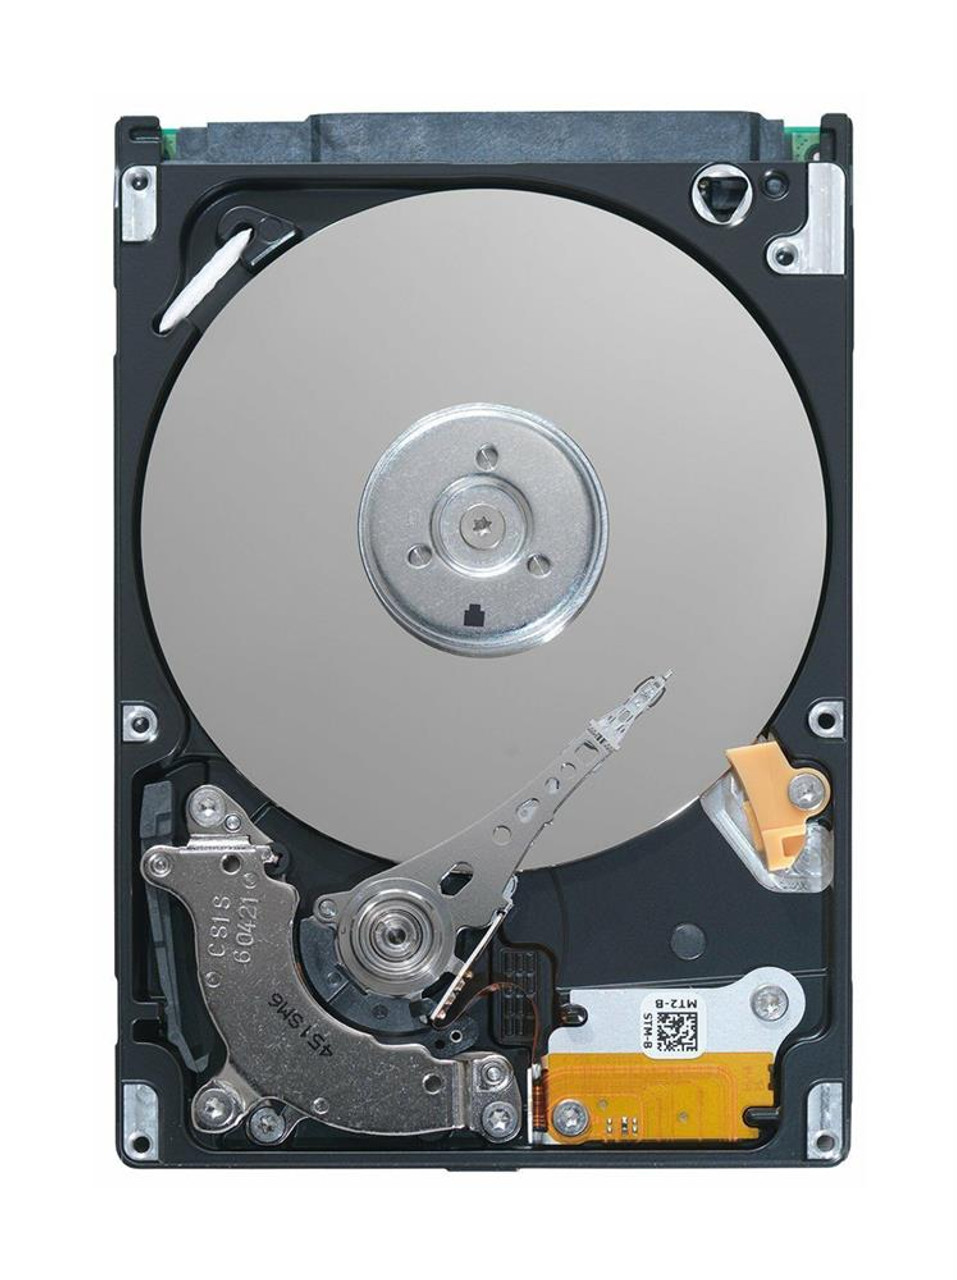 19302-712600DP ASUS 500GB 7200RPM SATA 6Gbps 3.5-inch Internal Hard Drive for All-in-One E Series